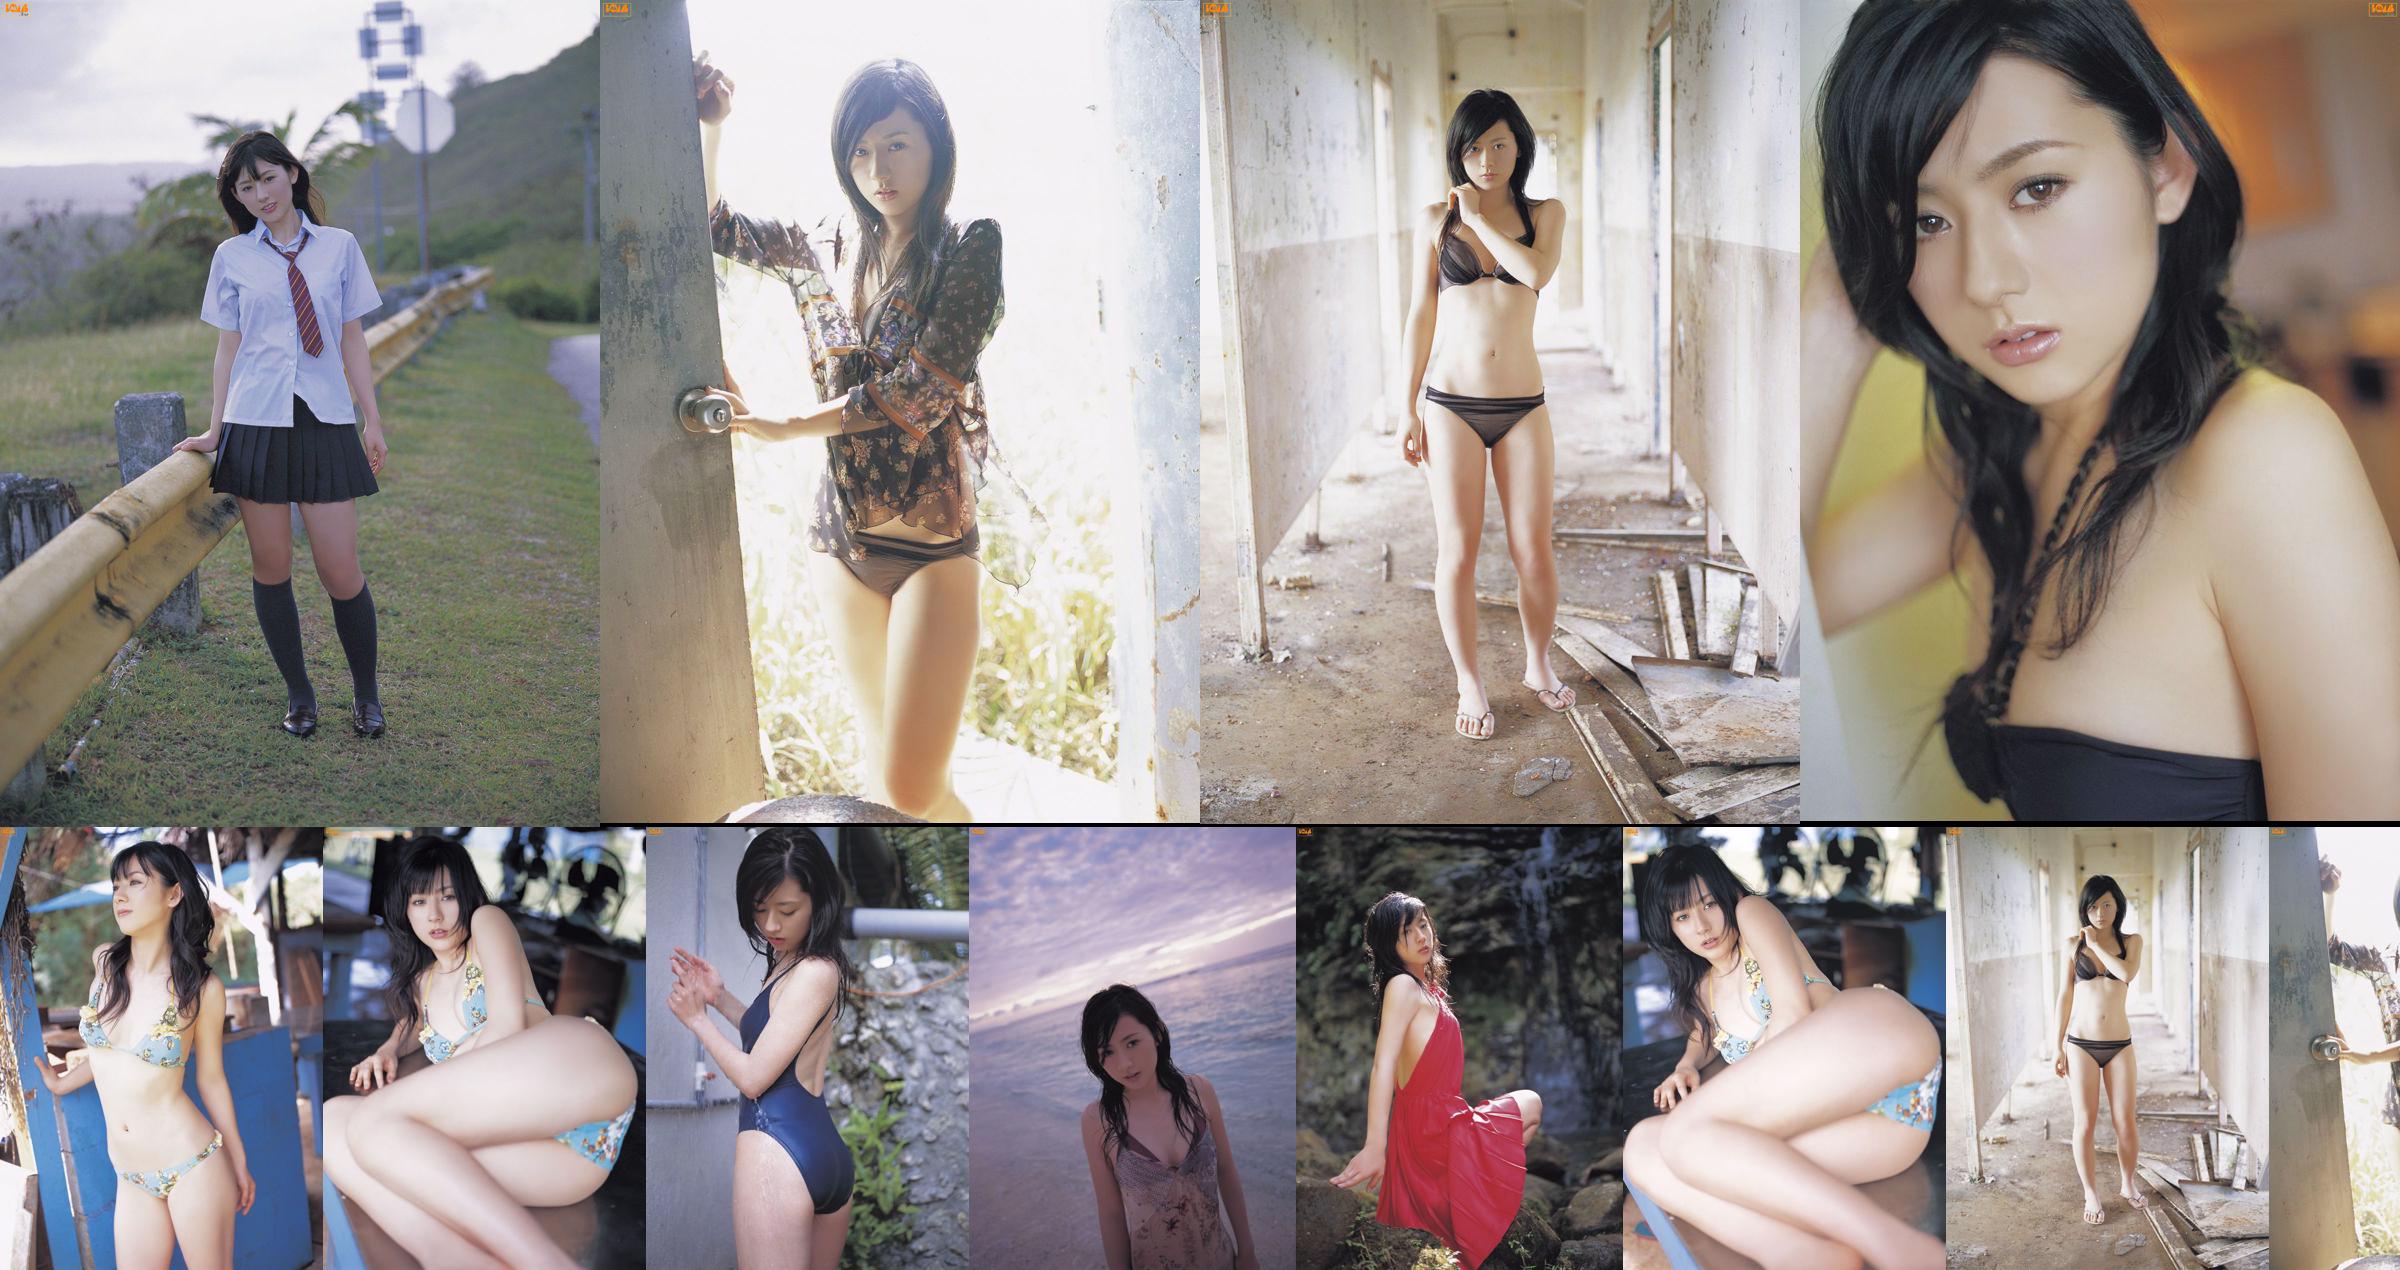 [Bomb.TV] May 2007 Miki Inase Miki Reo / Miki Reo No.4af5b4 Page 1